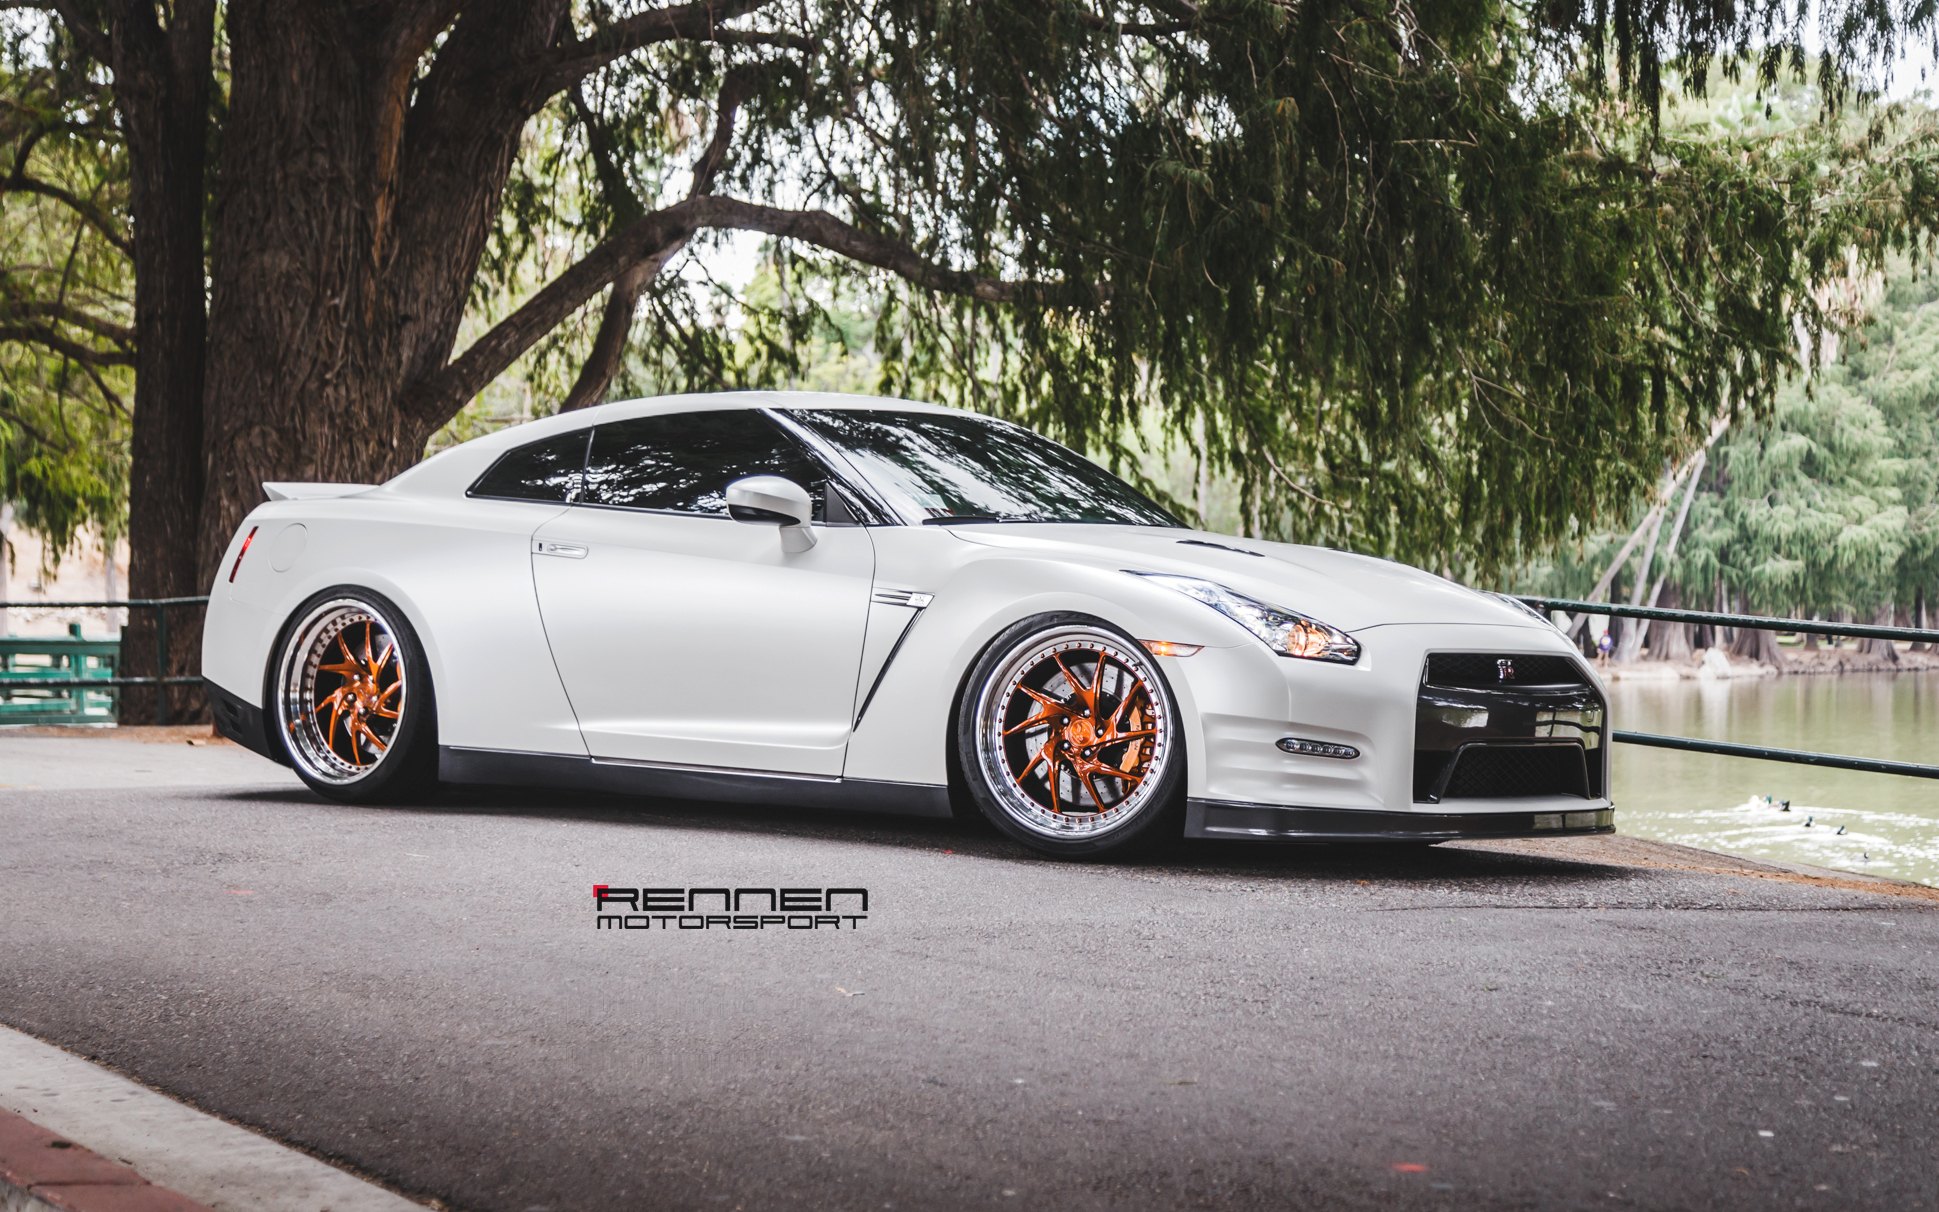 Aftermarket Side Skirts on White Nissan GT-R - Photo by Rennen International